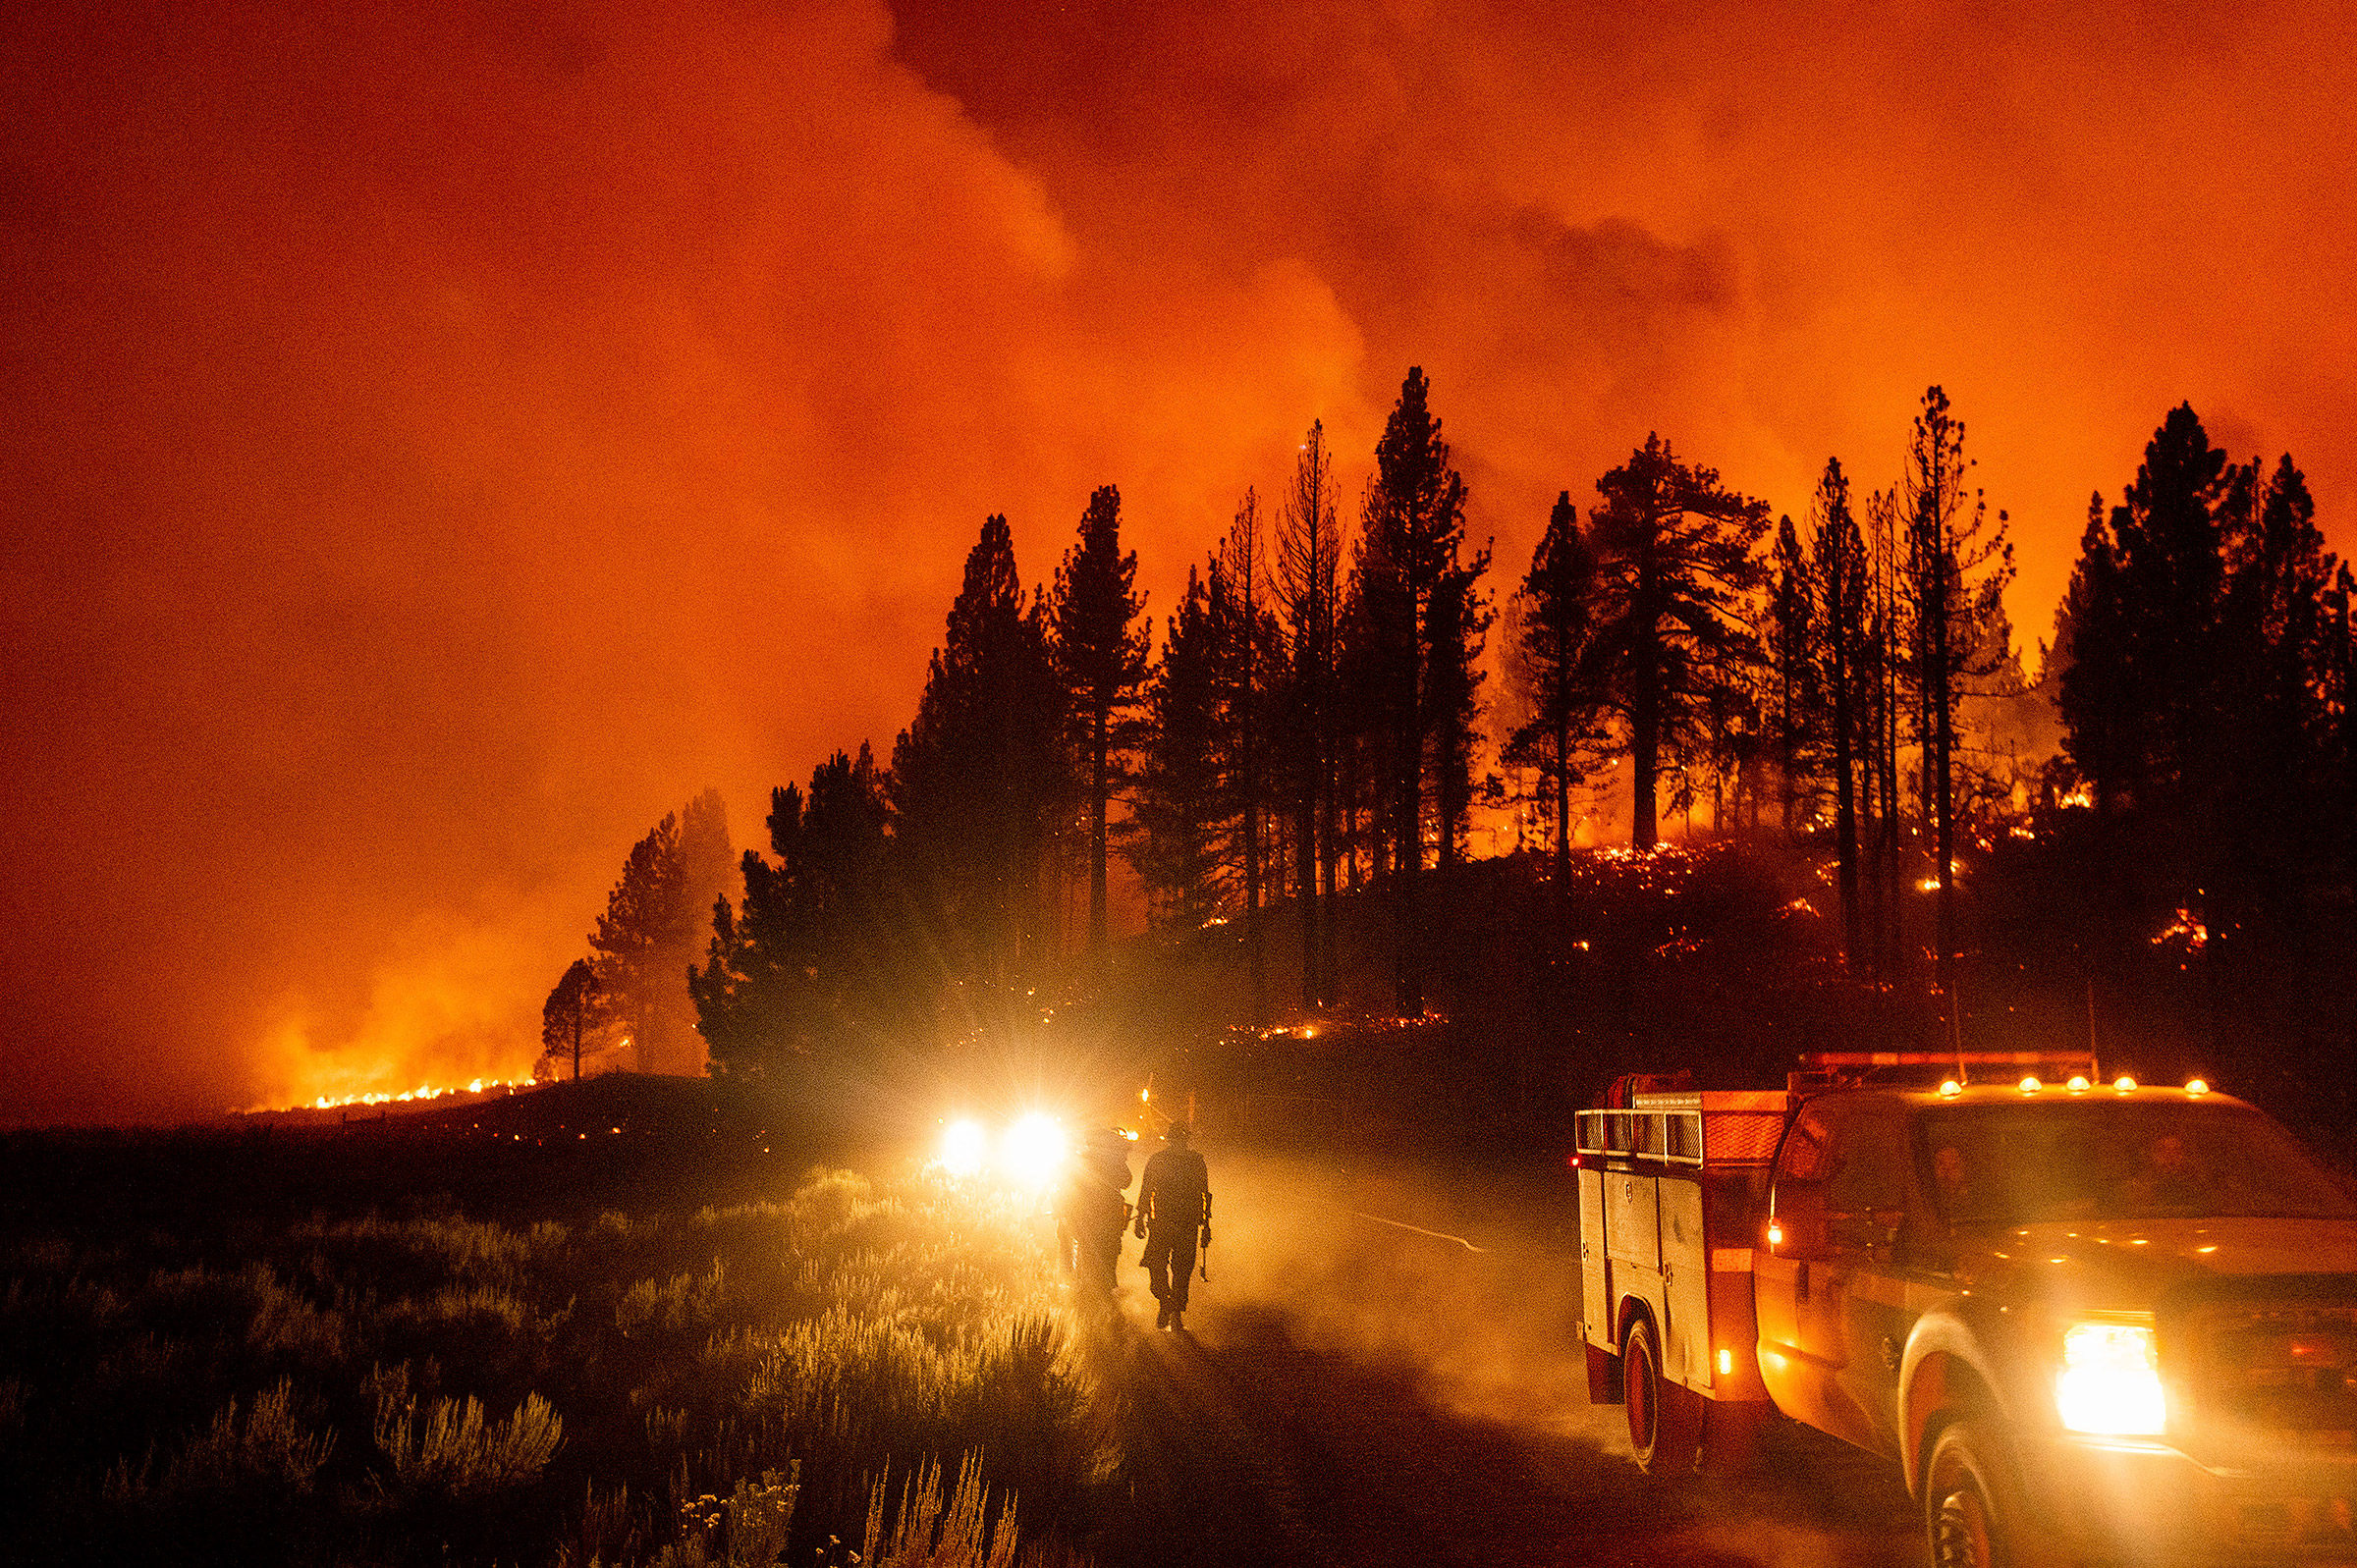 Firefighters battle the Sugar Fire, part of the Beckwourth Complex Fire, burning in Plumas National Forest, Calif., on July 8. (Noah Berger—AP)